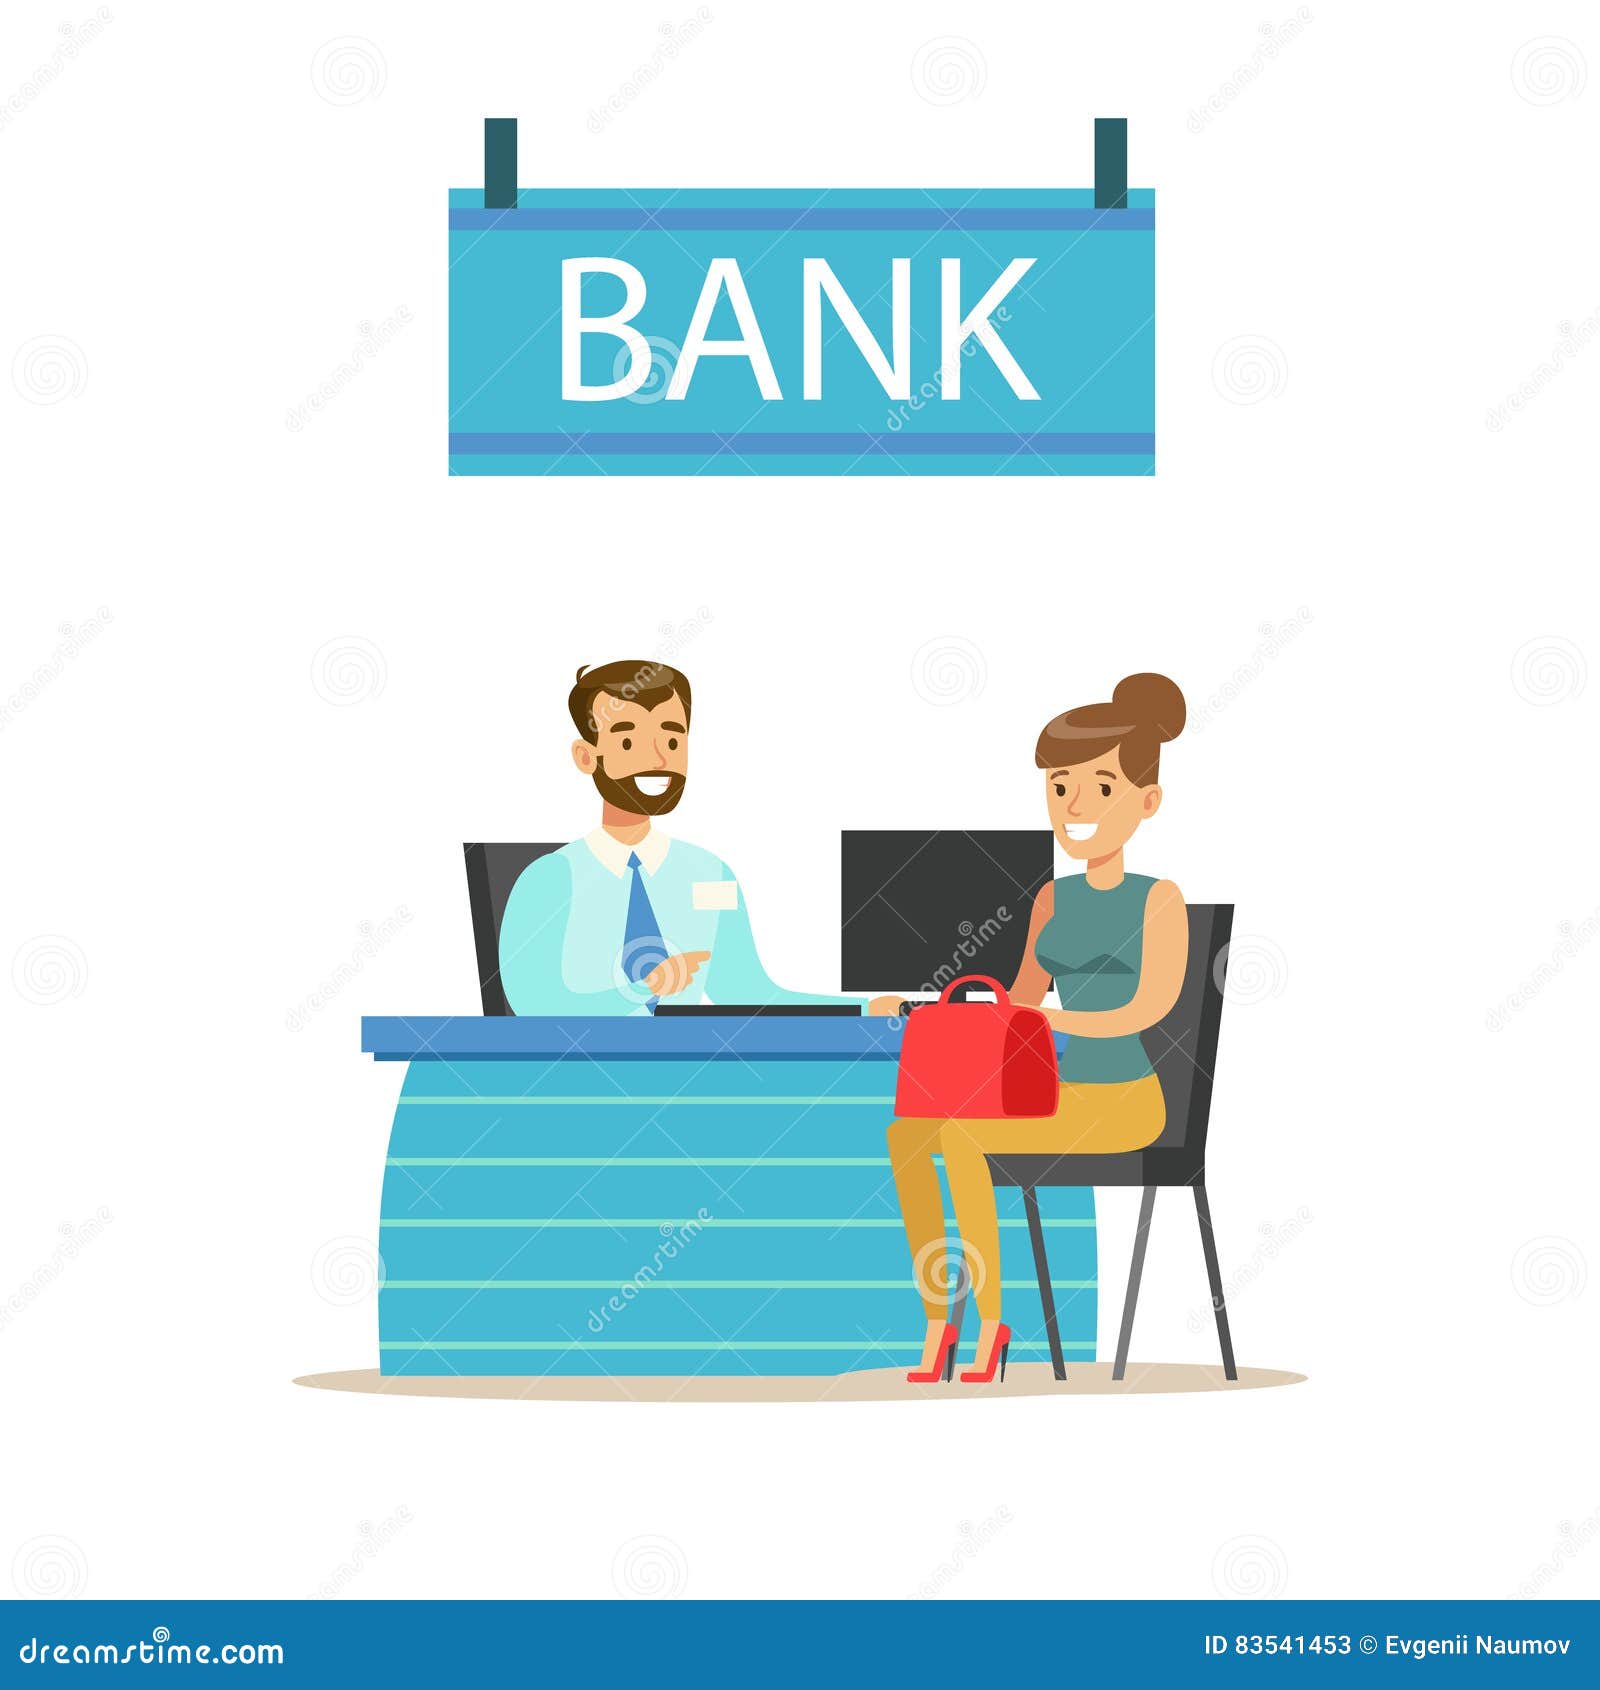 bank manager at his desk and the client. bank service, account management and financial affairs themed 